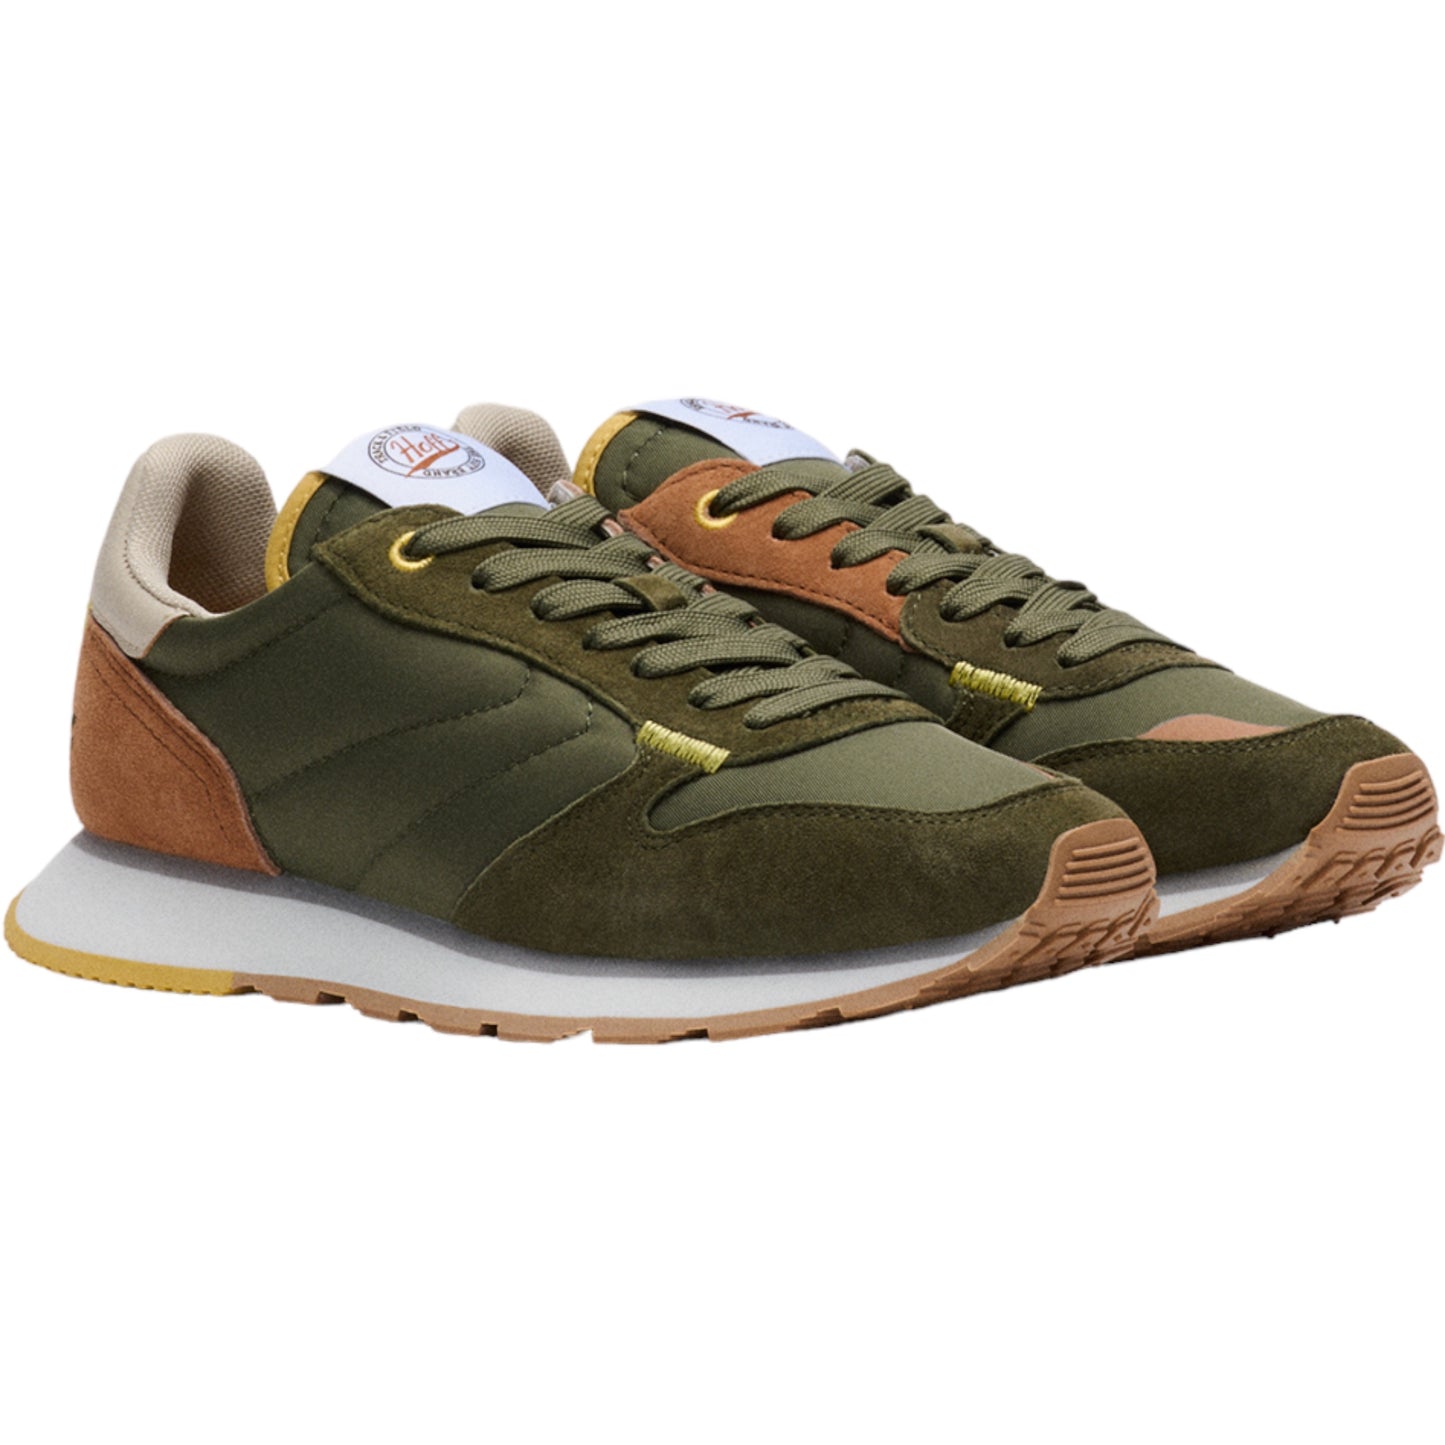 Conker Boutique Hoff Thebes Khaki Trainer shown as a pair